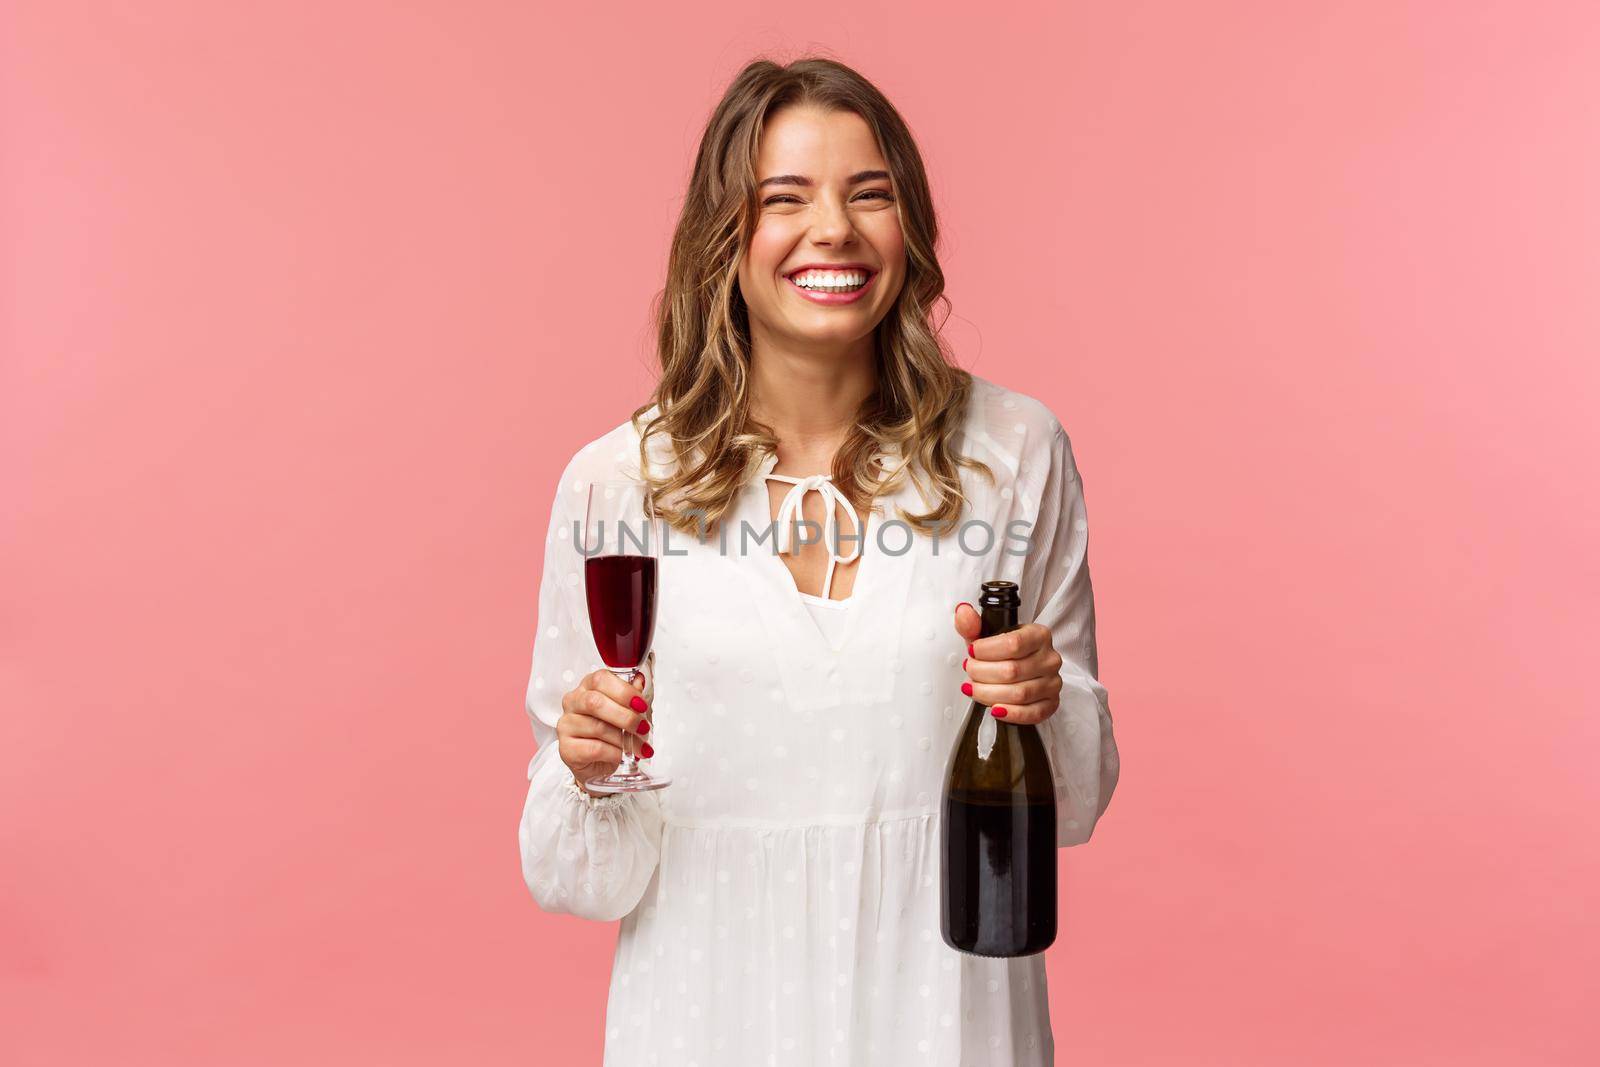 Holidays, spring and party concept. Portrait of happy and carefree european blond female celebrating in white dress, holding bottle champagne or wine, drinking from glass and laughing.